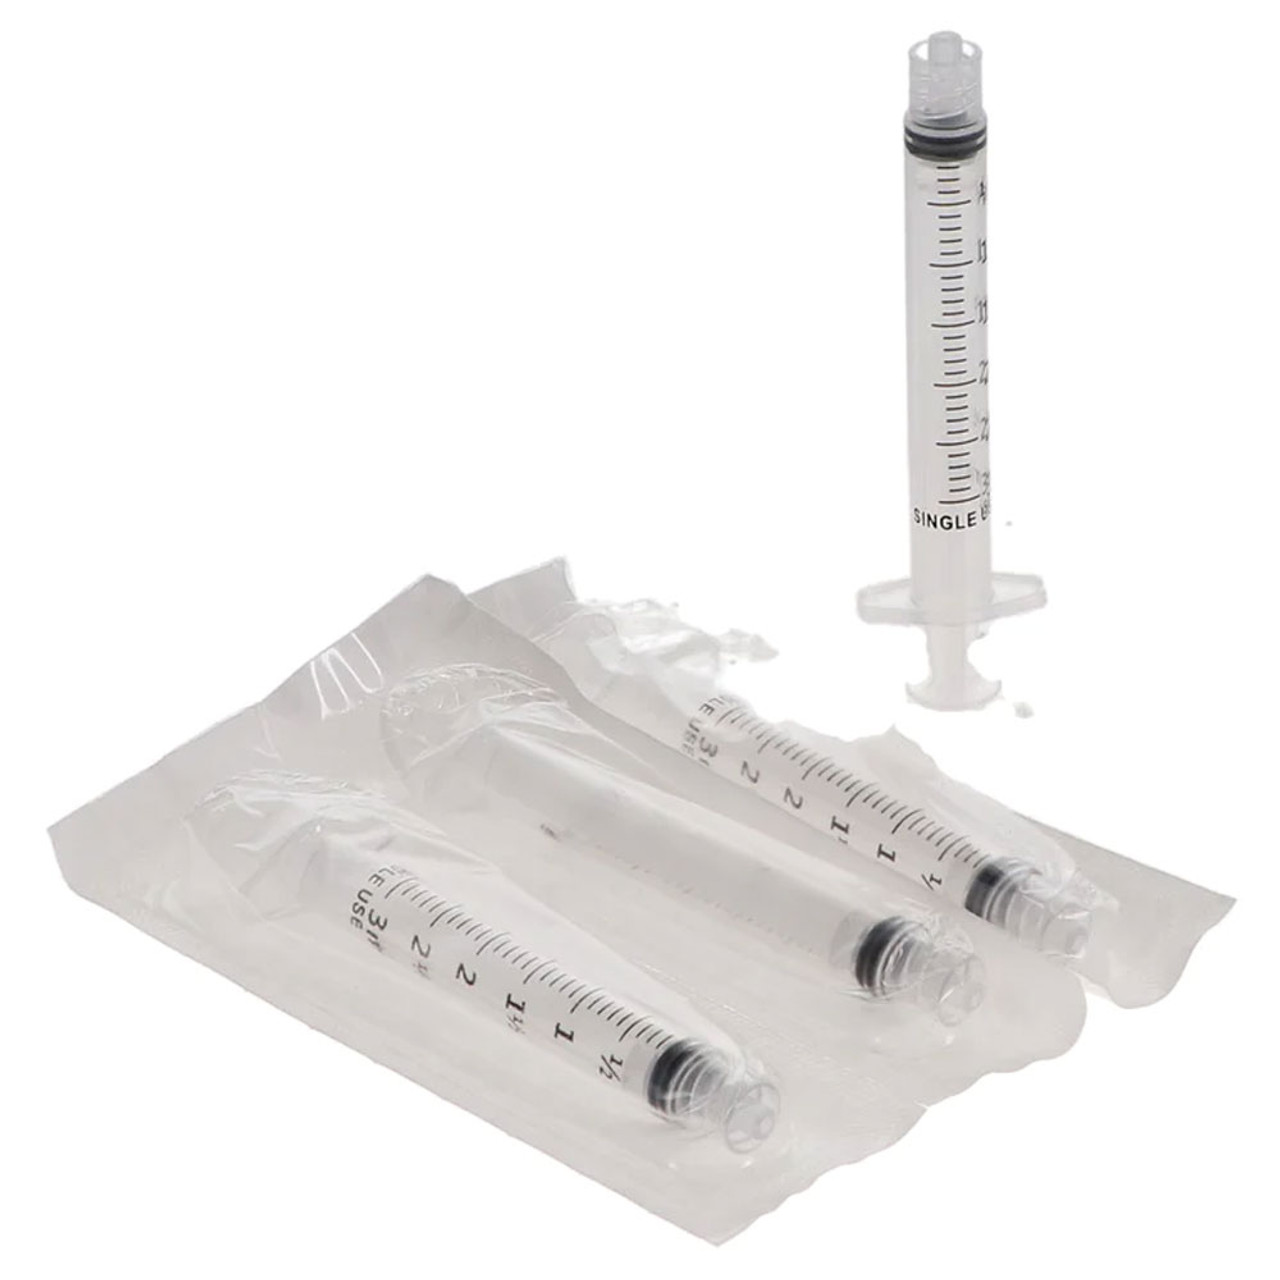 House Brand 3cc Luer Lock disposable syringes for flushing and